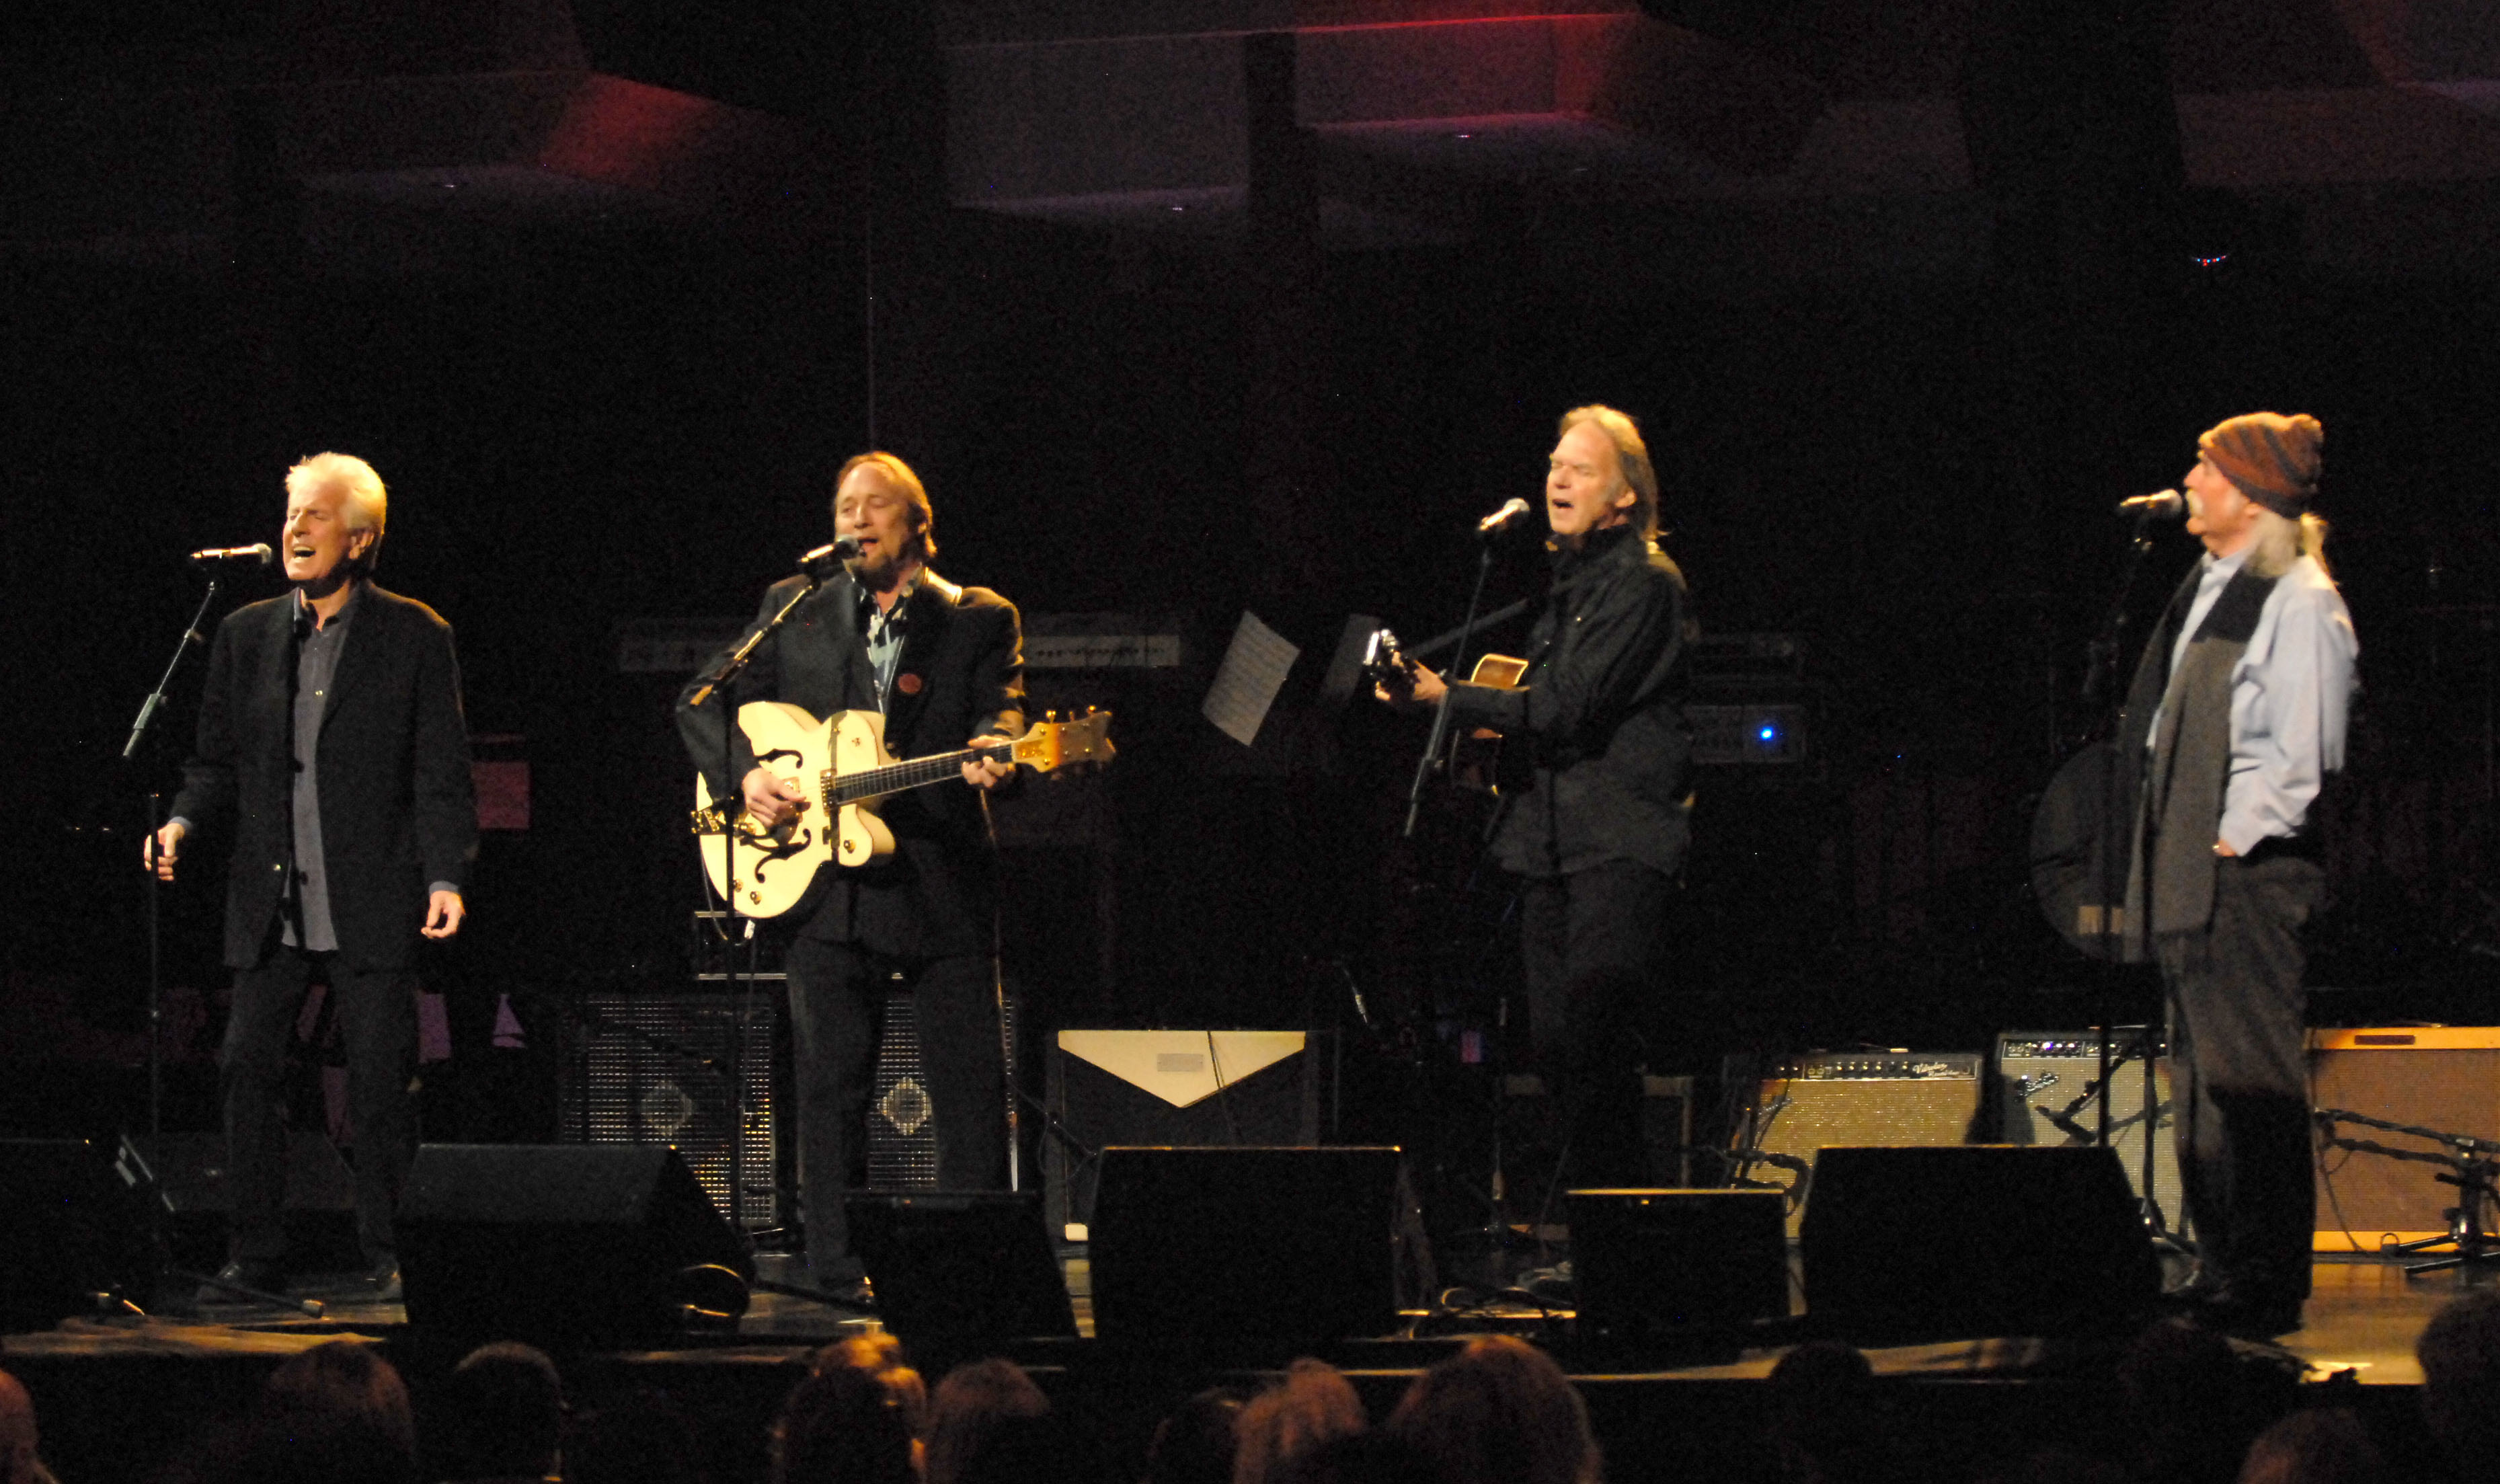 Graham Nash, Stephen Stills, Neil Young, and David Crosby perform onstage. 